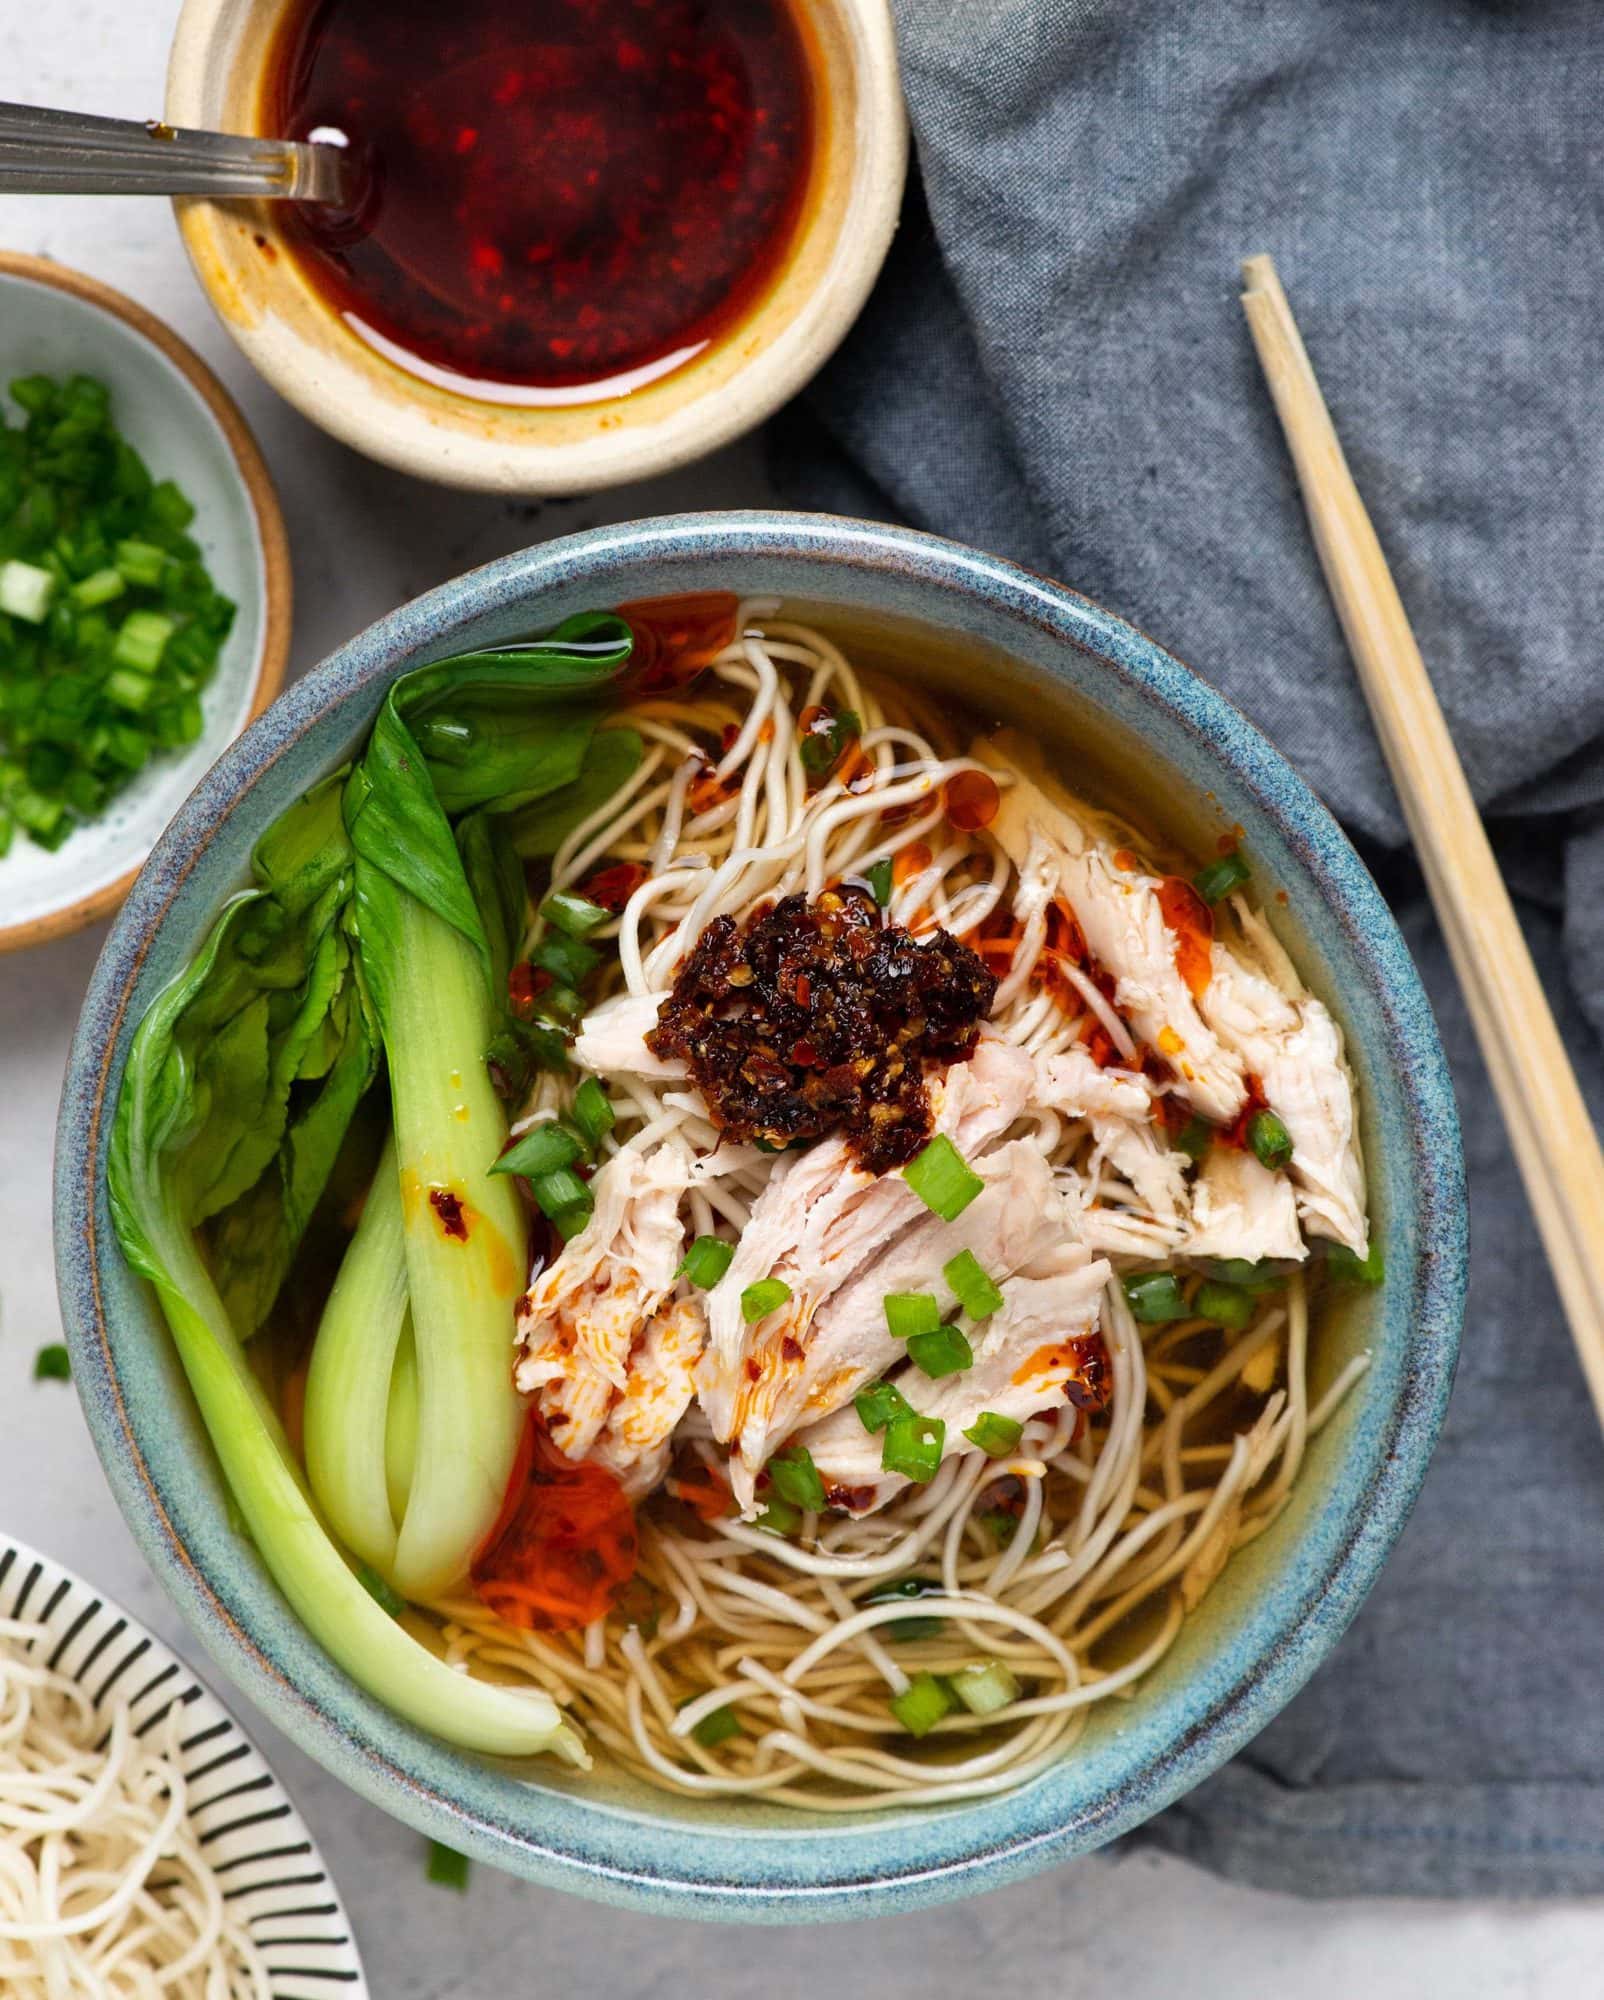 https://theflavoursofkitchen.com/wp-content/uploads/2021/09/Chinese-Chicken-Noodle-Soup-1-scaled.jpg